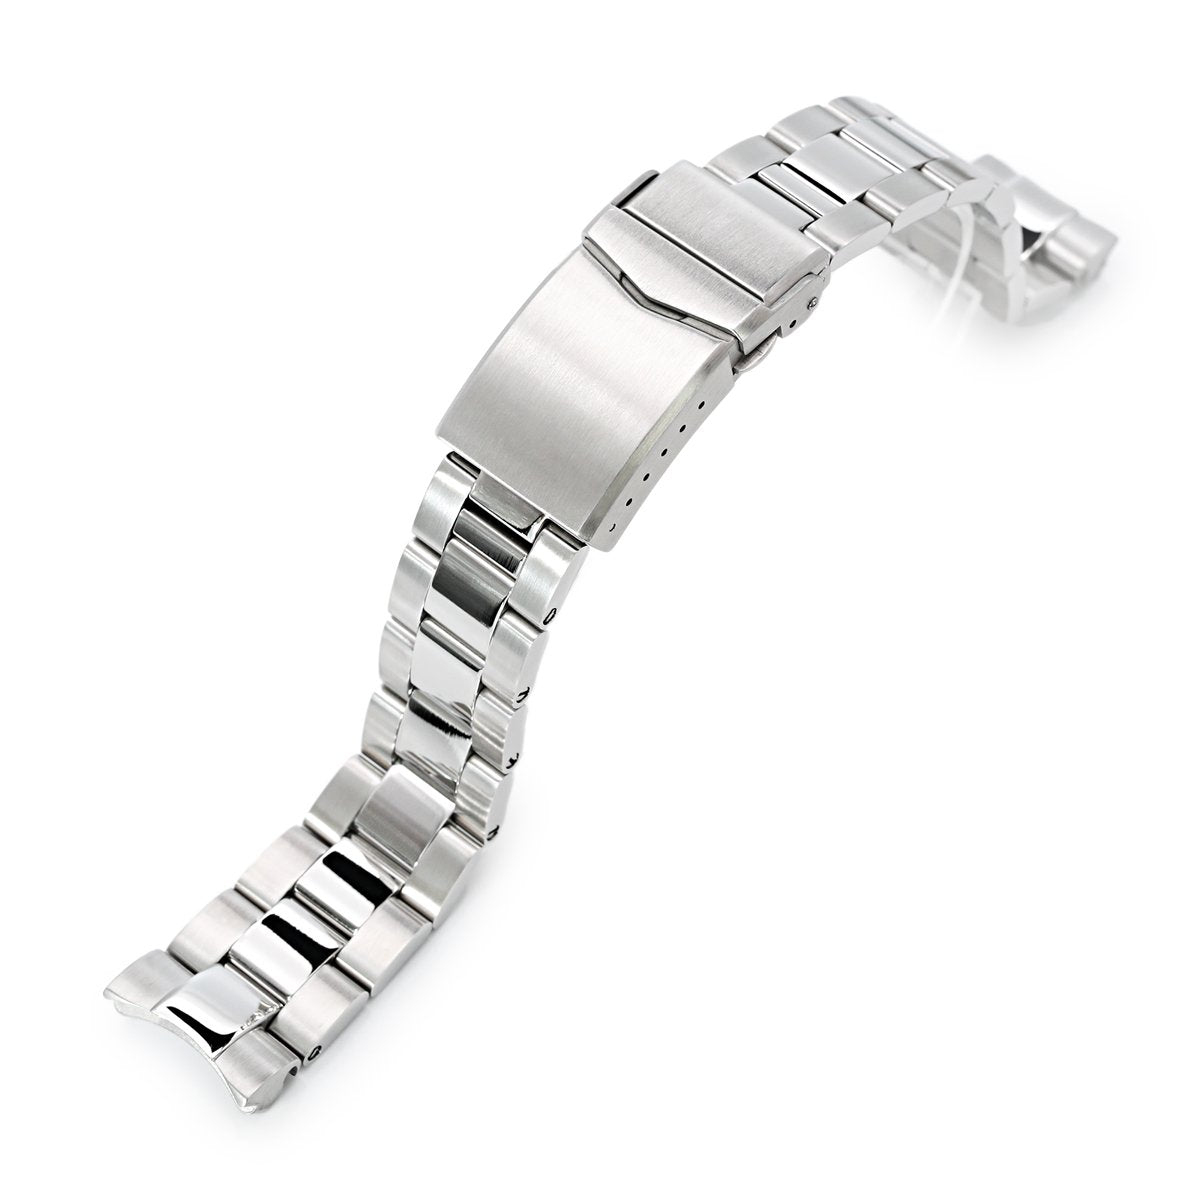 20mm Super-O Boyer 316L Stainless Steel Watch Bracelet for Seiko Mini Turtles SRPC35 V-Clasp Polished & Brushed Strapcode Watch Bands